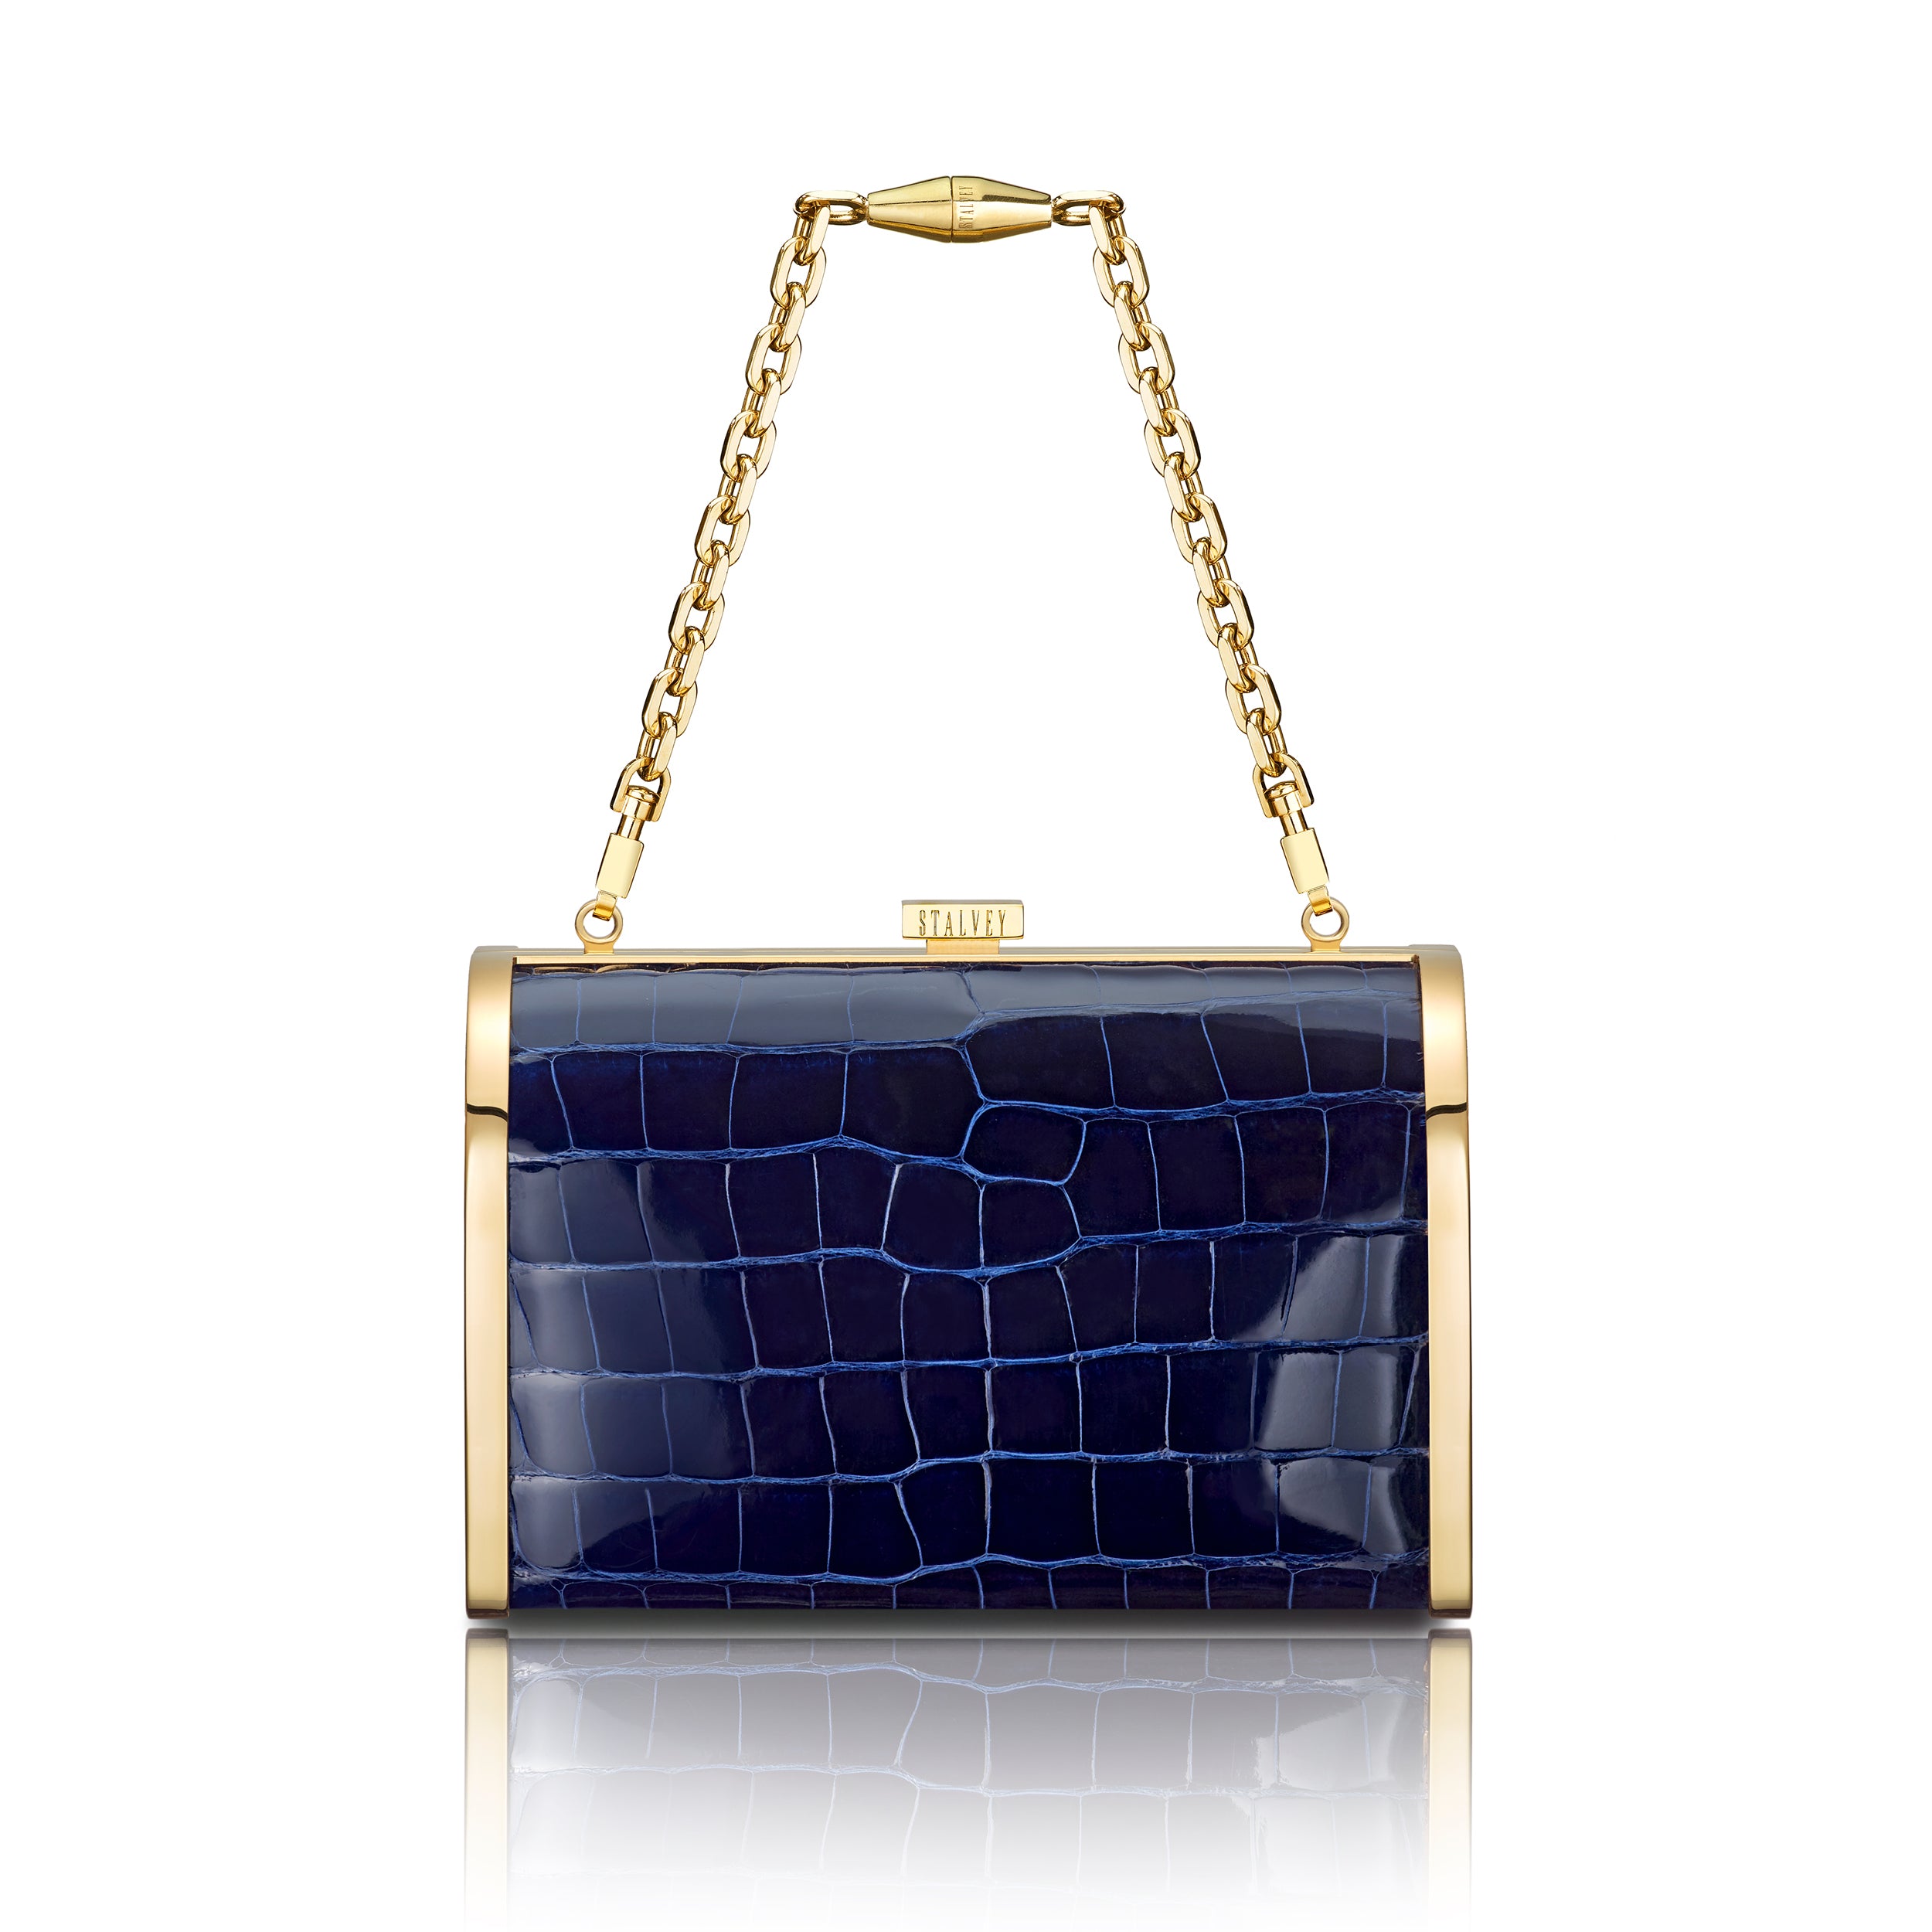 STALVEY Rounded Clutch in Marine Blue Alligator with 24kt Gold Hardware Front View with Chain